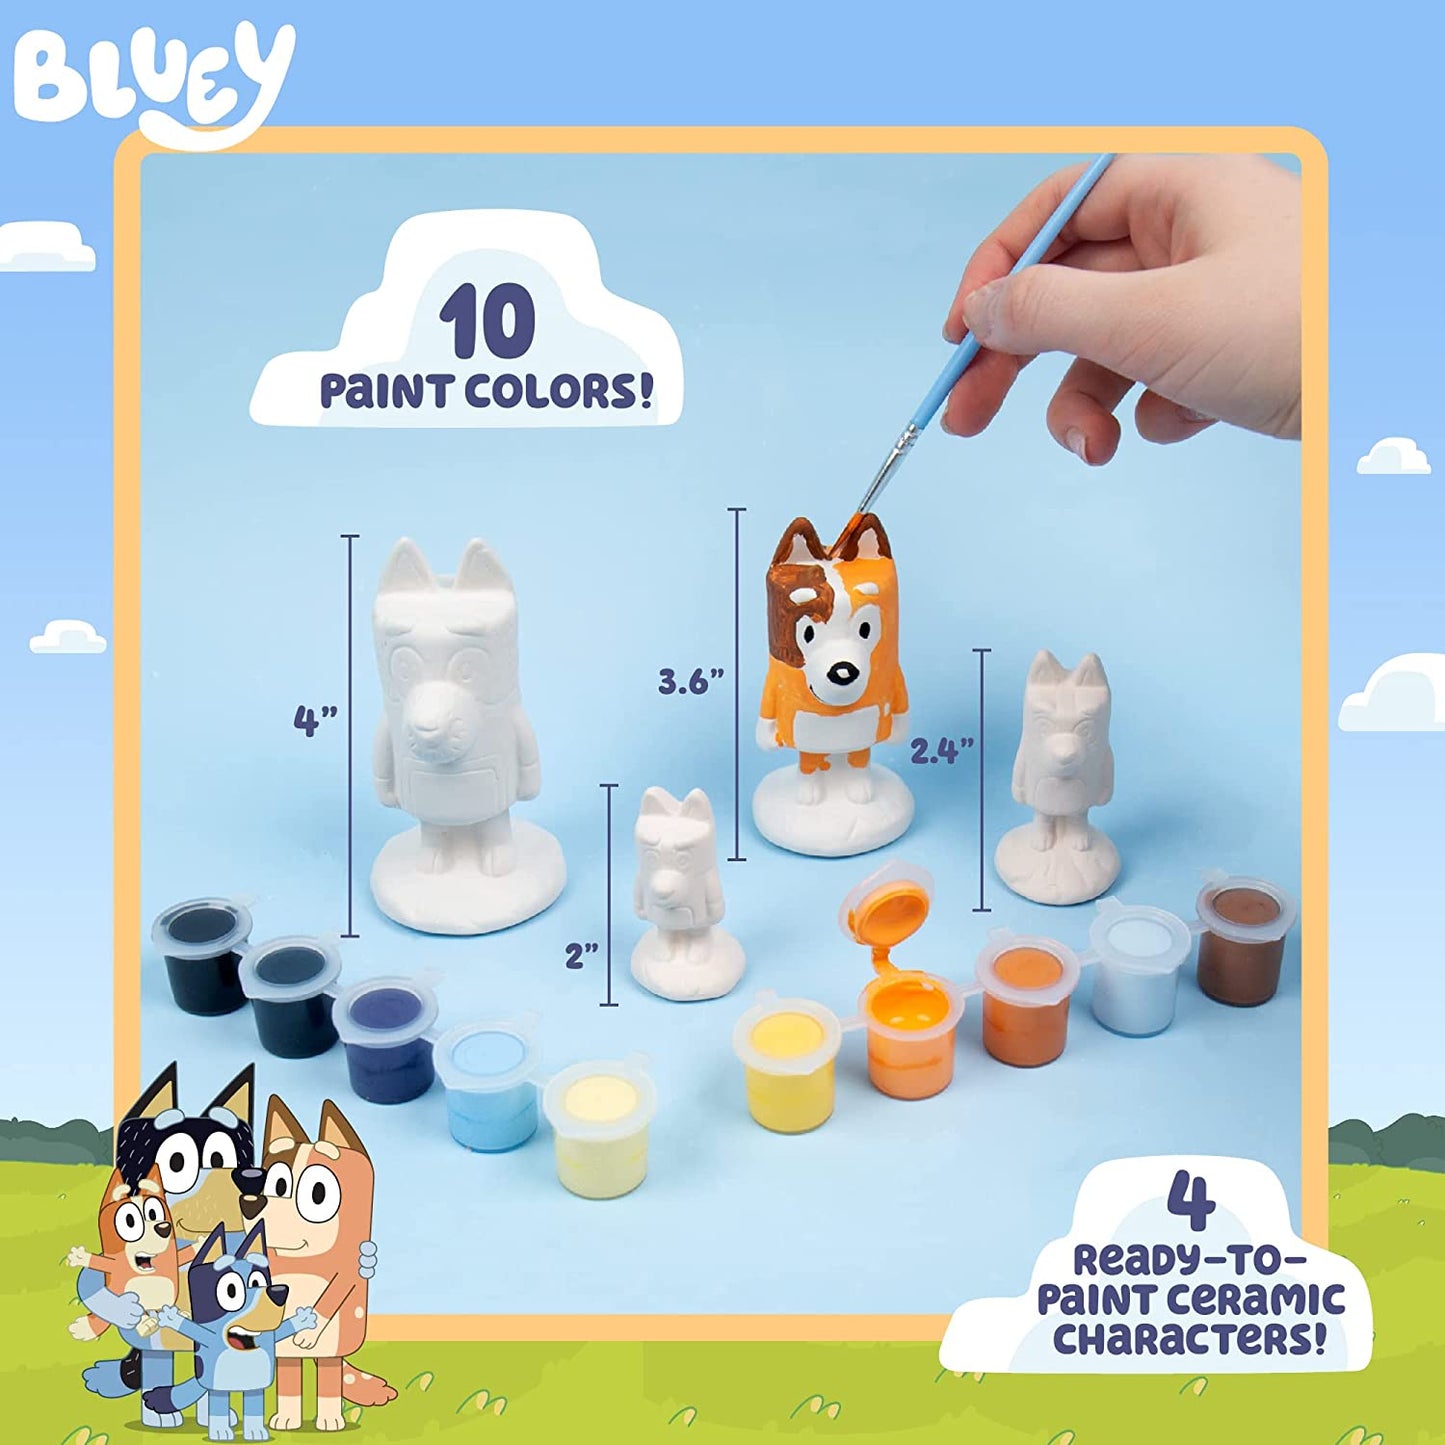 Bluey - Paint Your Own Figurines